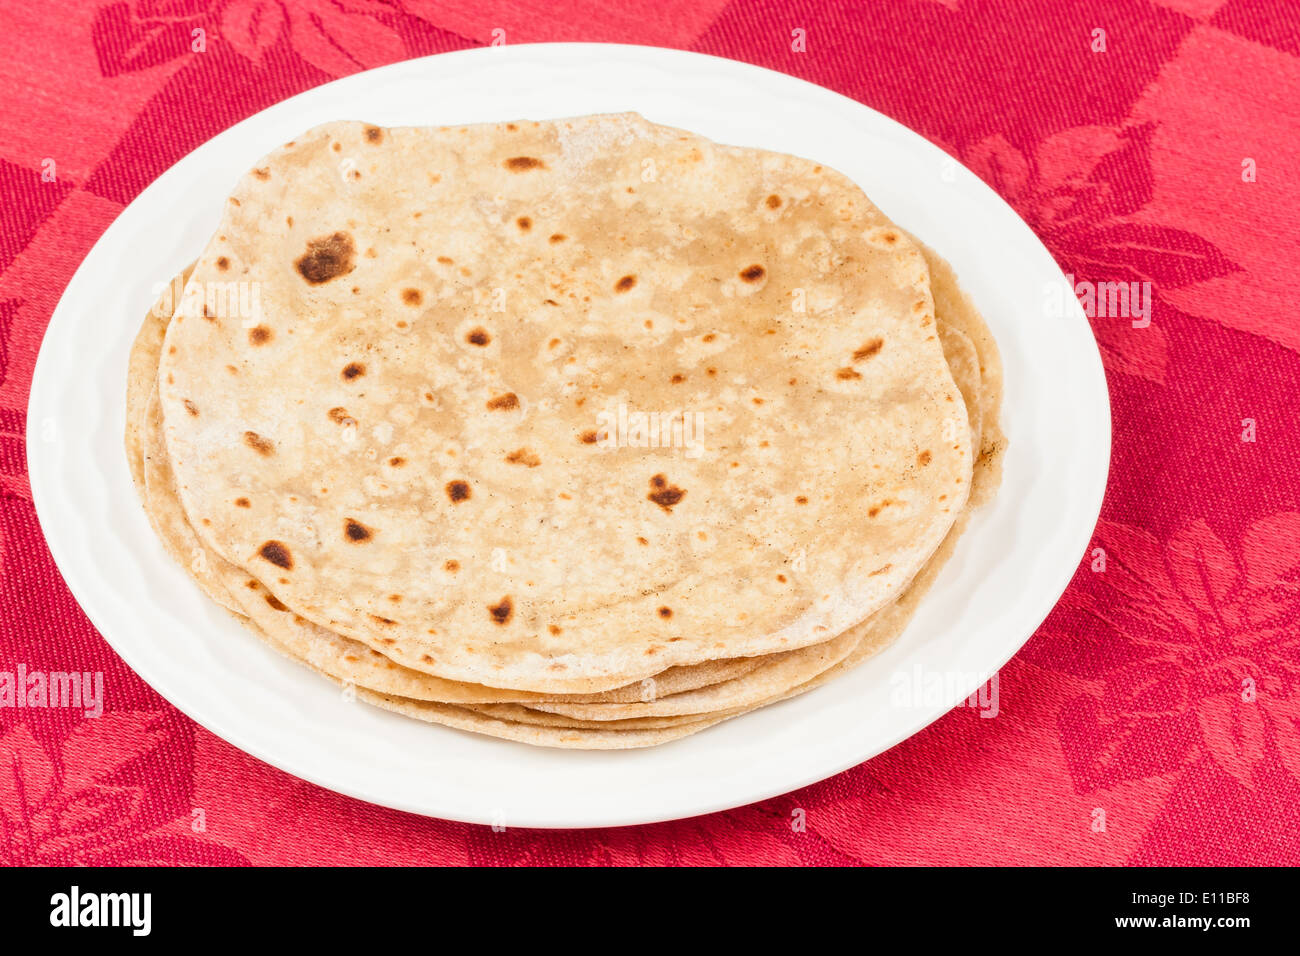 https://c8.alamy.com/comp/E11BF8/homemade-stack-of-chapati-indian-bread-on-a-plate-E11BF8.jpg